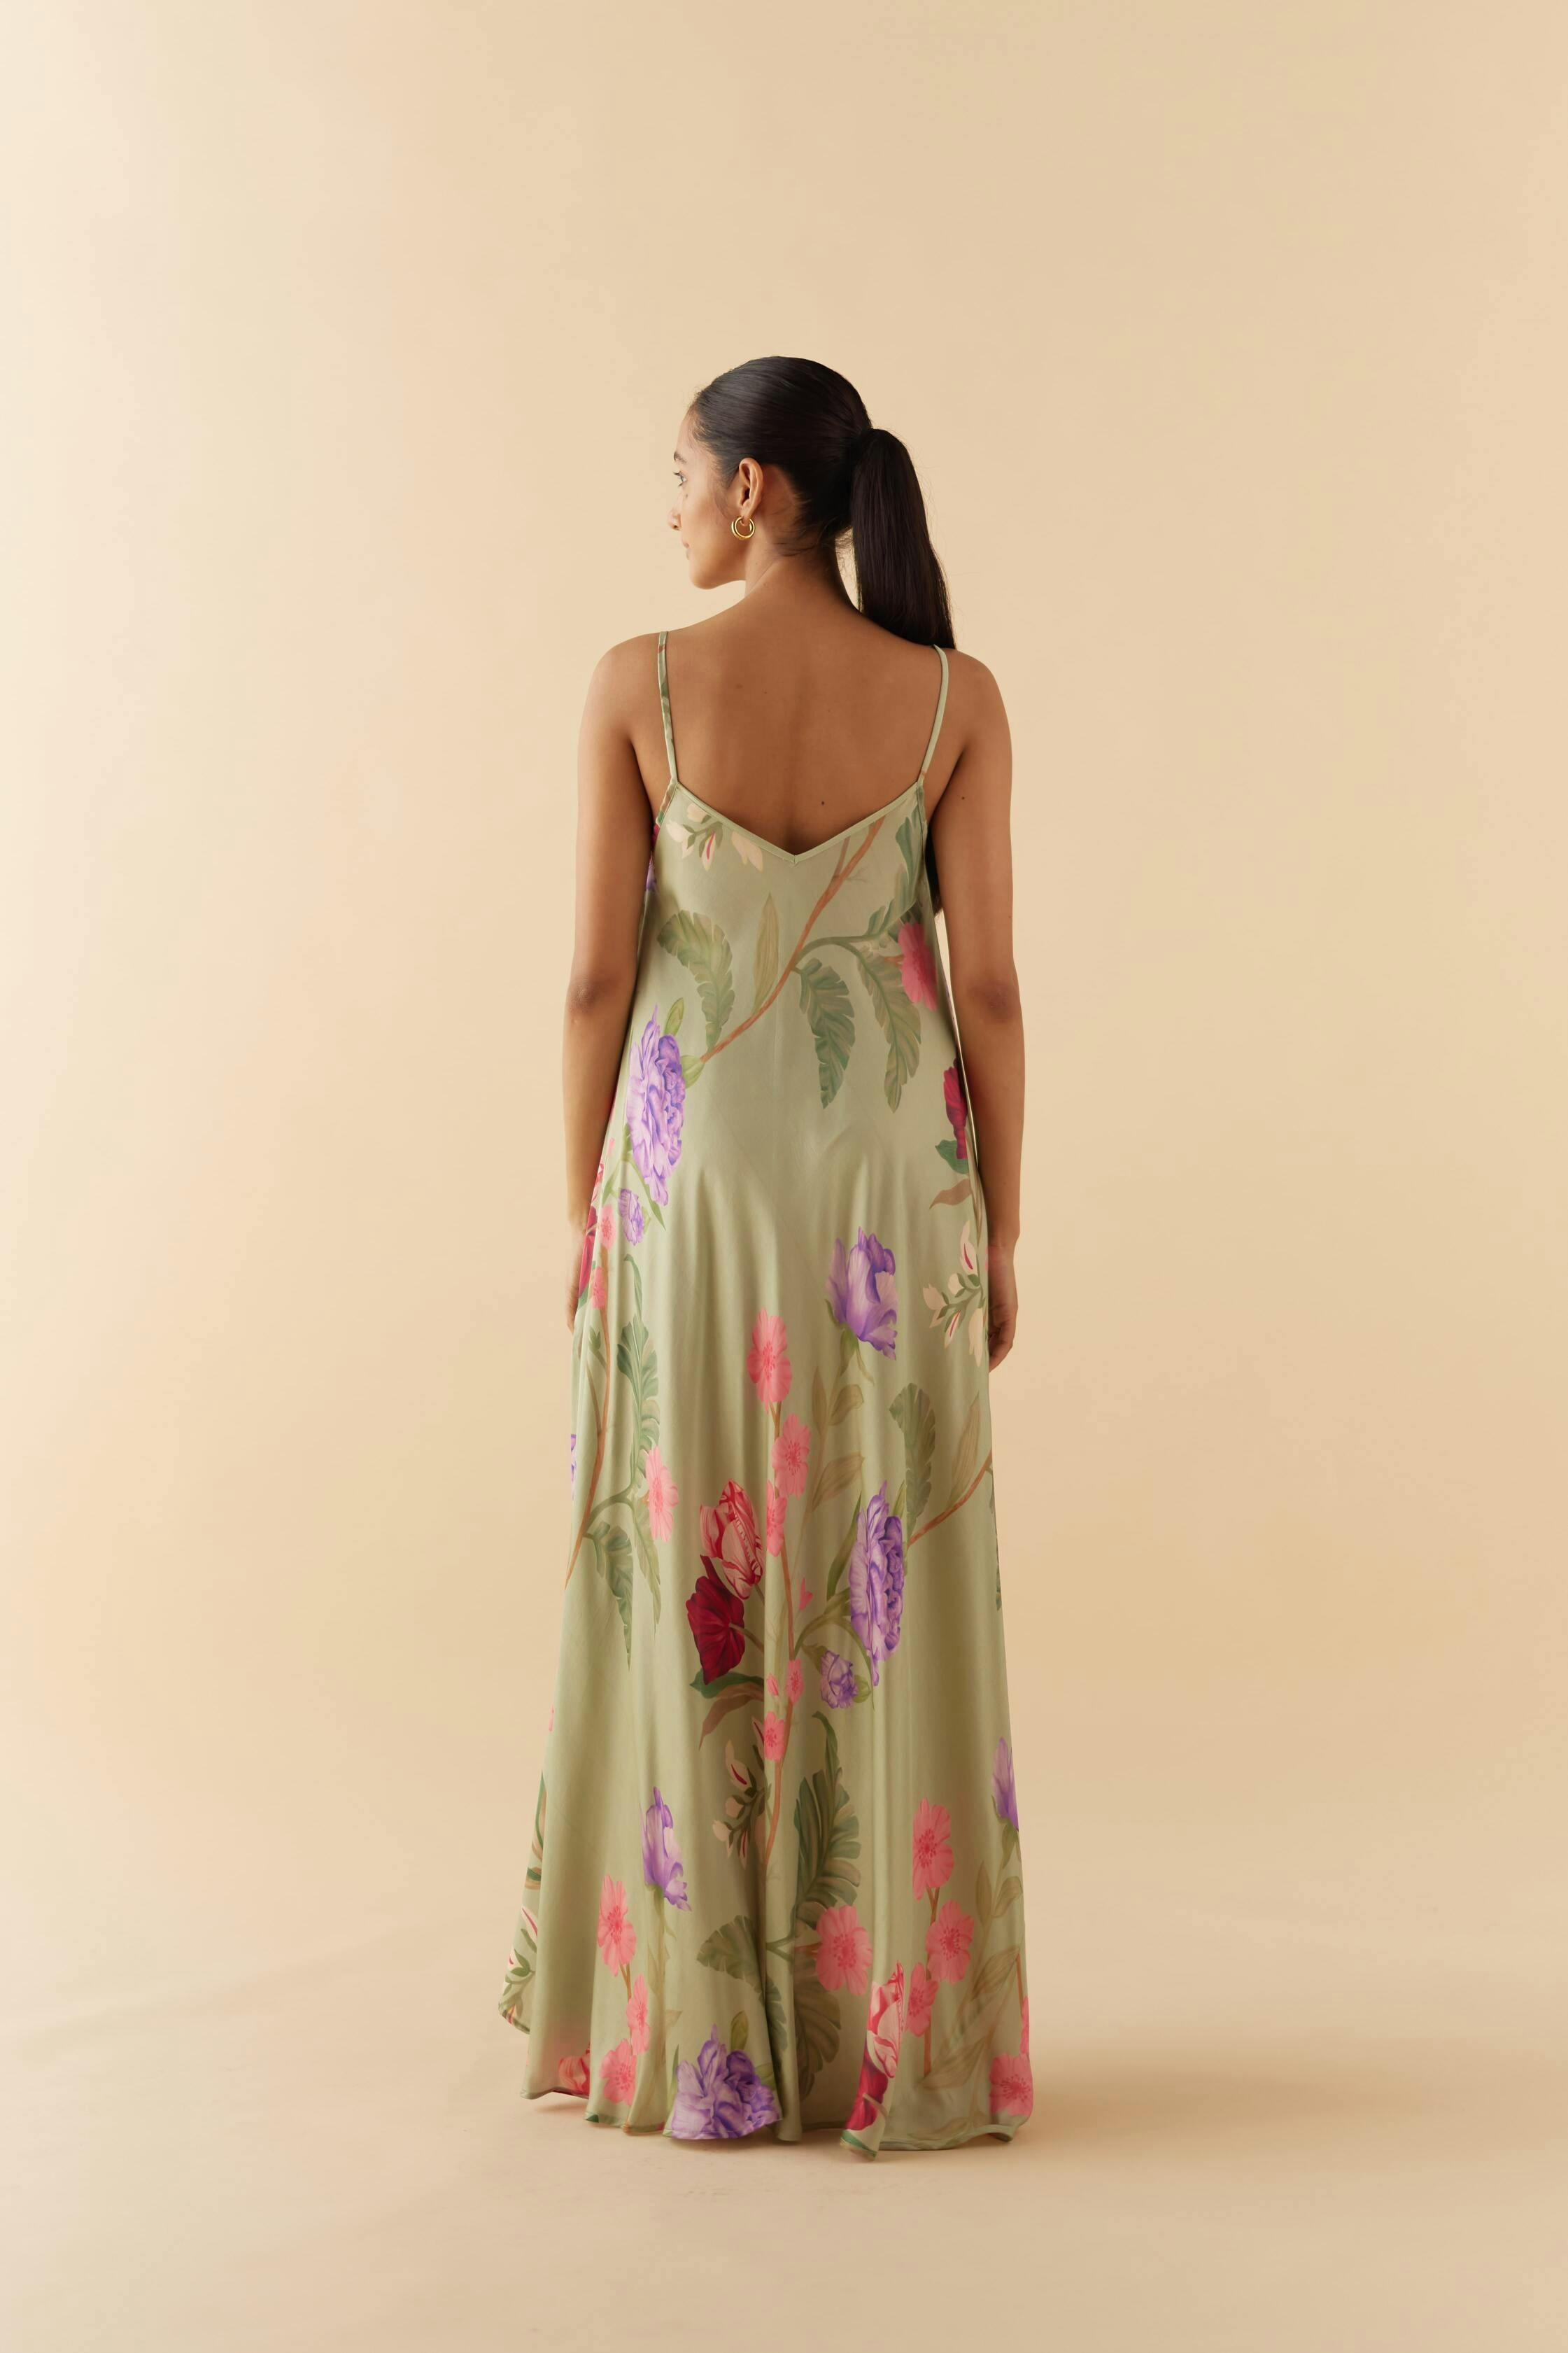 Thumbnail preview #3 for Jade Floral Dream Lounge Cami Dress